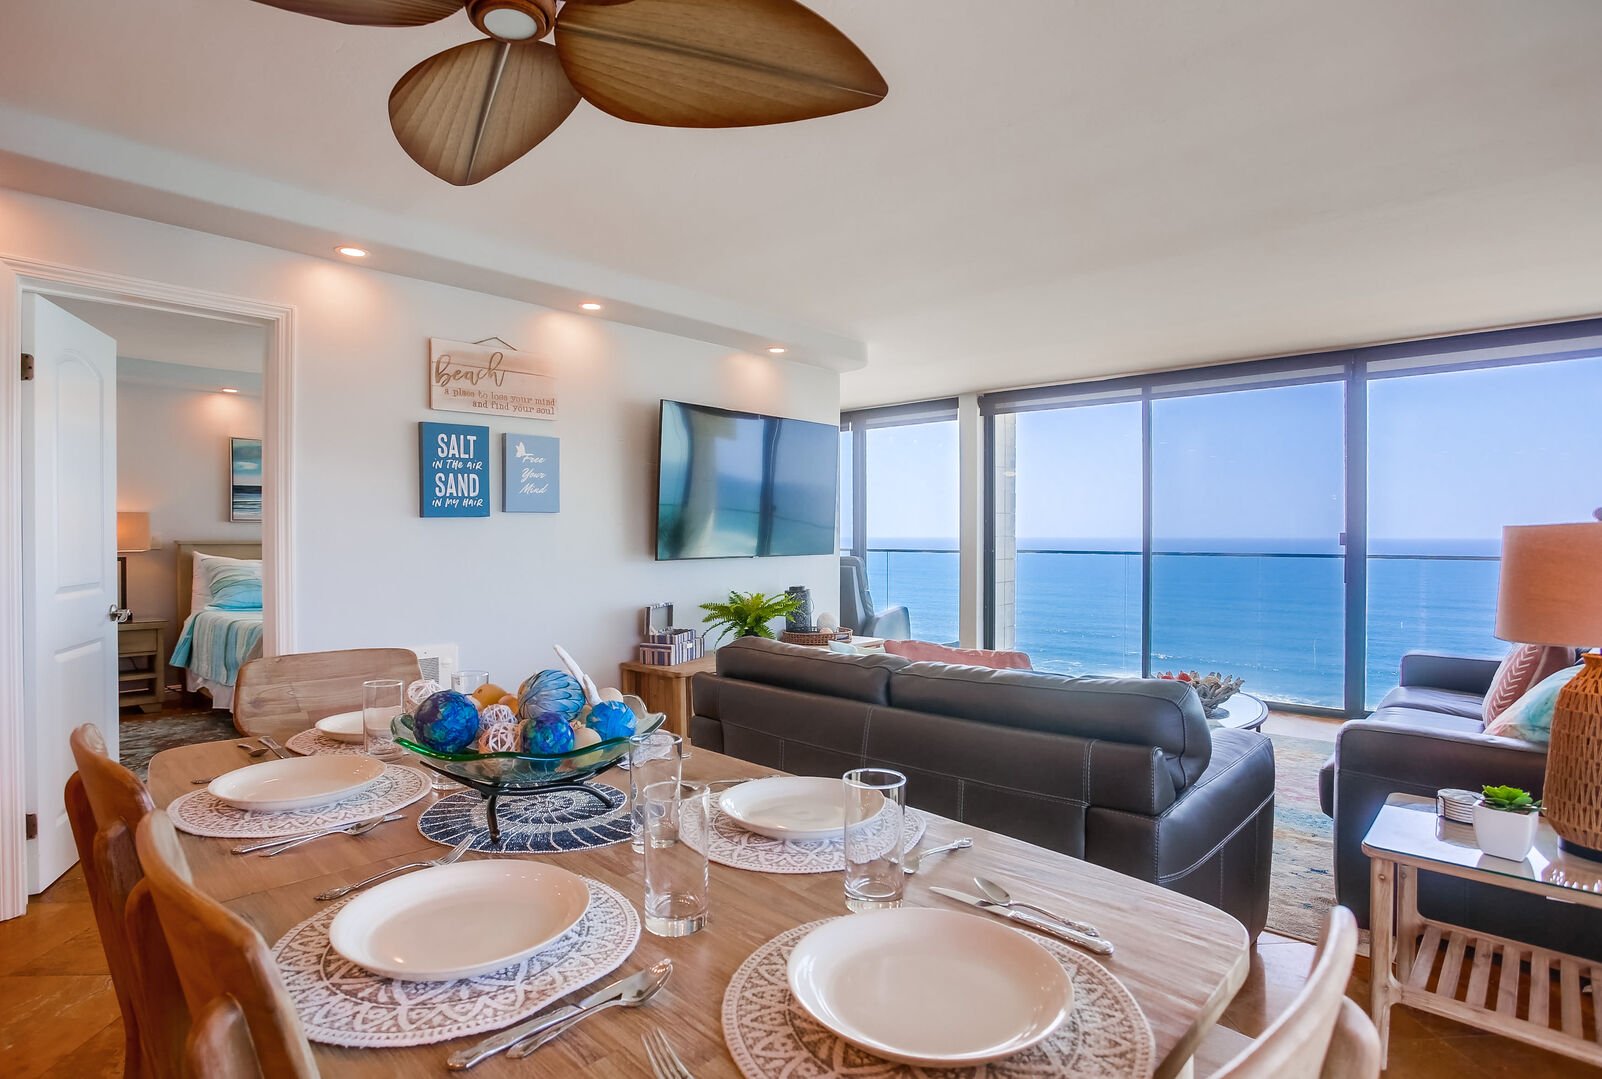 Dining room with view into the living room and master bedroom. Living room has a queen size sleeper sofa, smart TV with dvr and stunning floor to ceiling views of the beach!